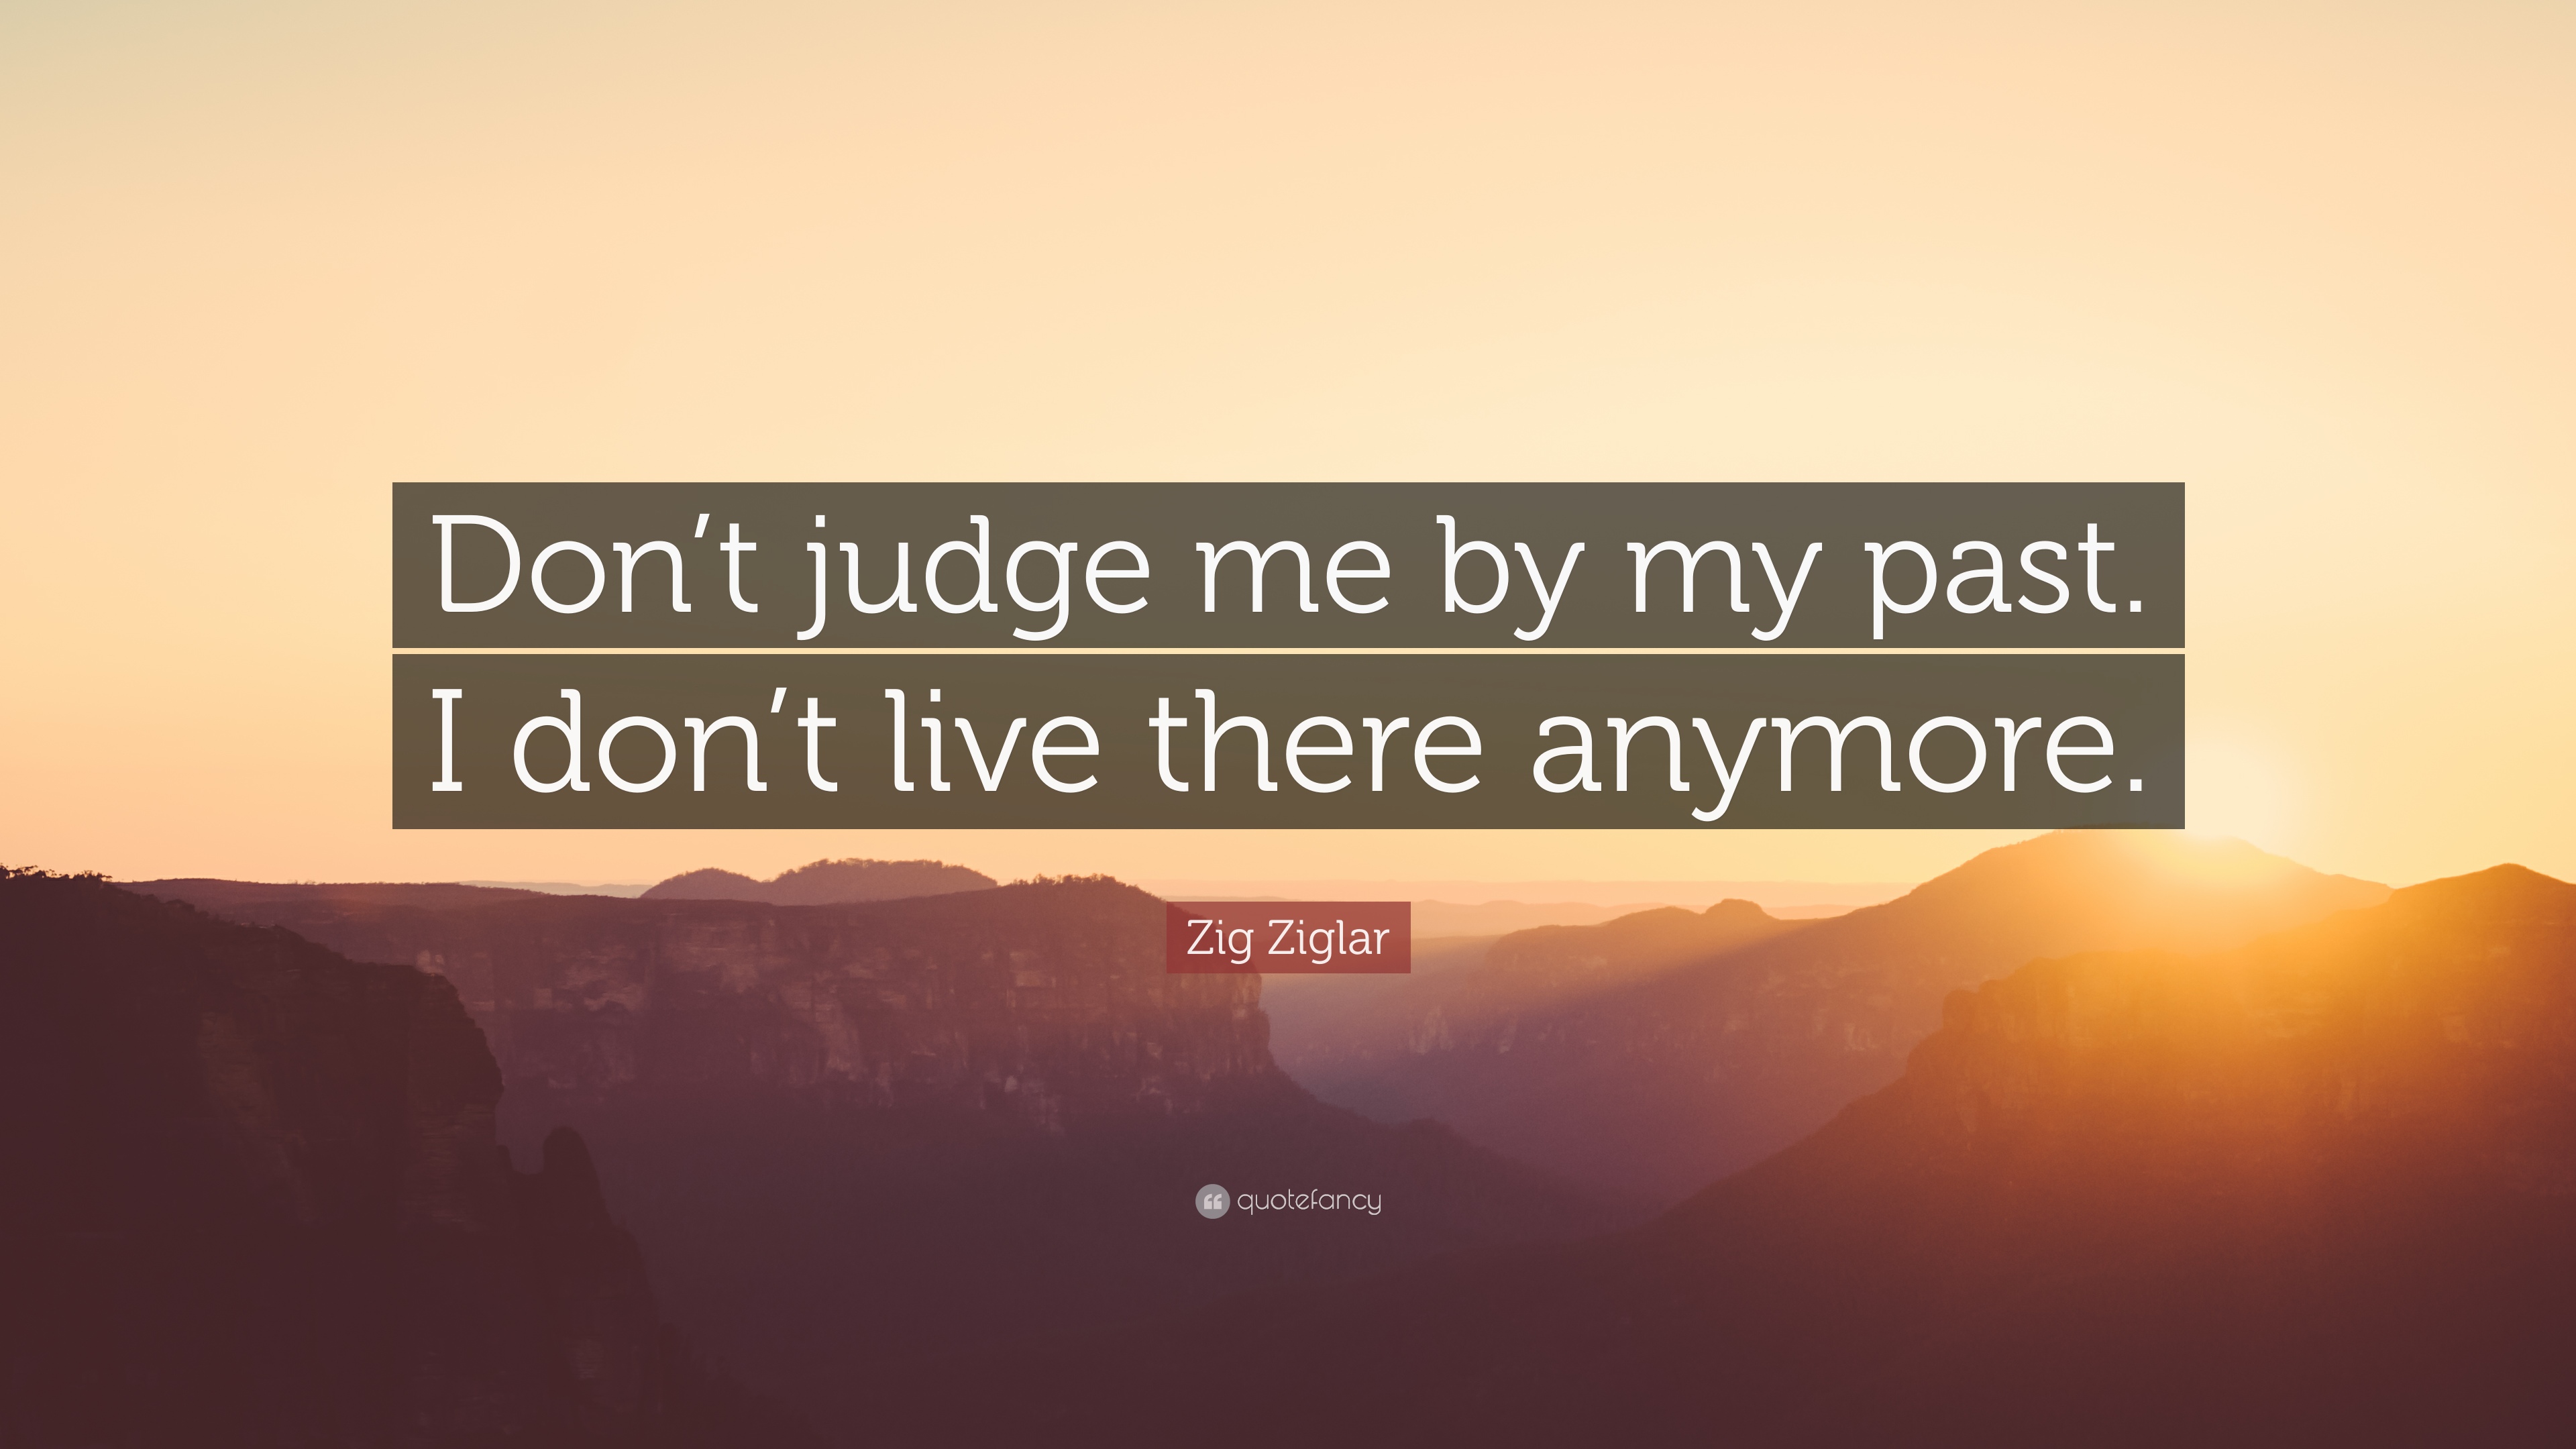 Zig Ziglar Quote: “Don't judge me by my past. I don't live there anymore.”